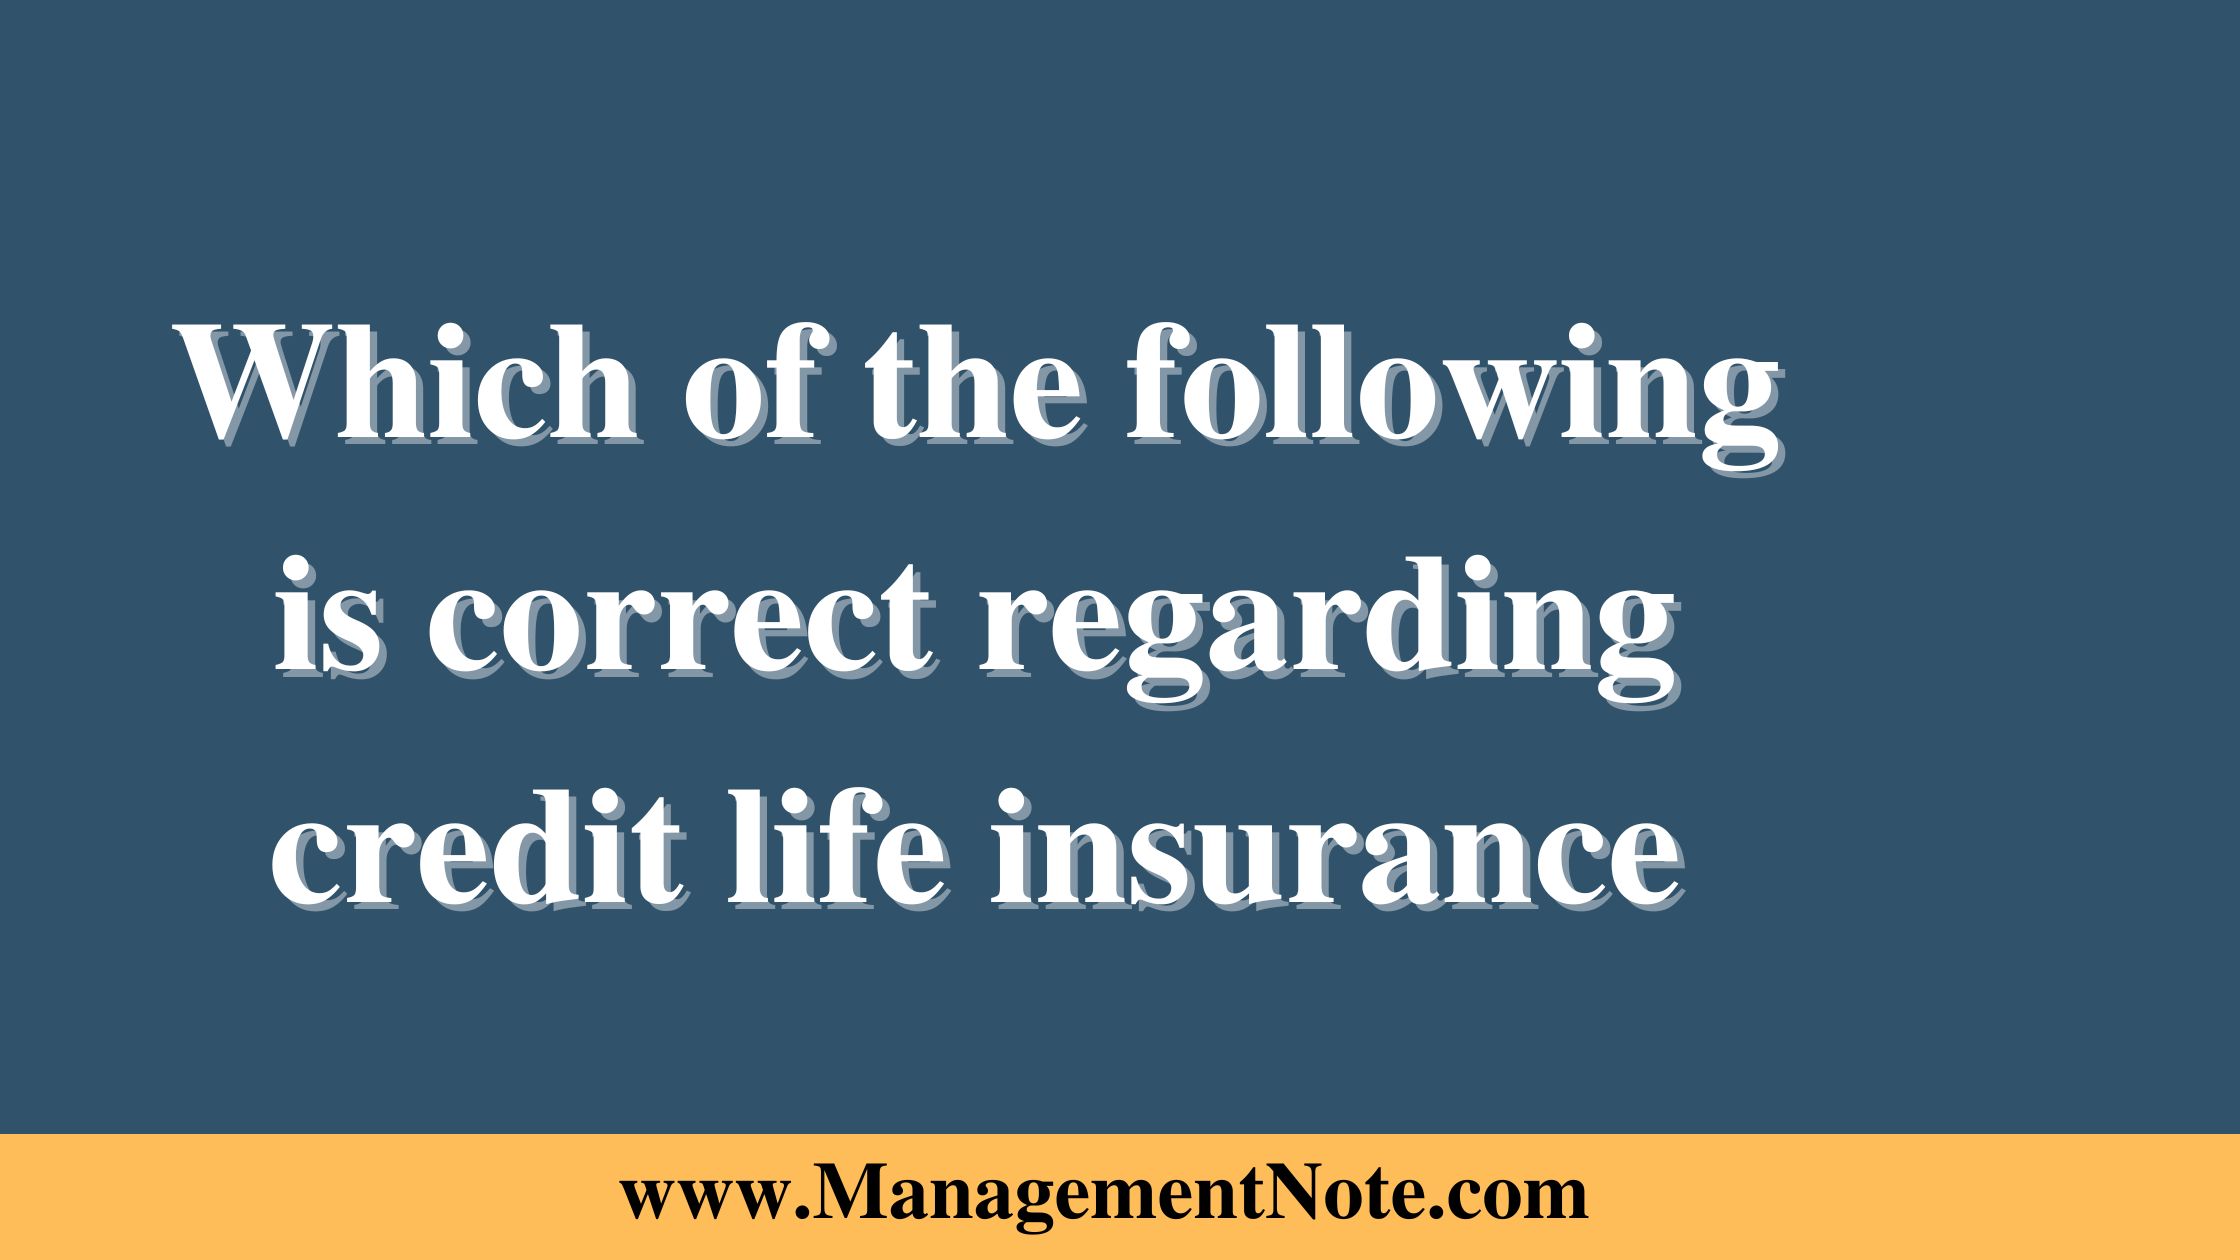 which of the following is correct regarding credit life insurance?